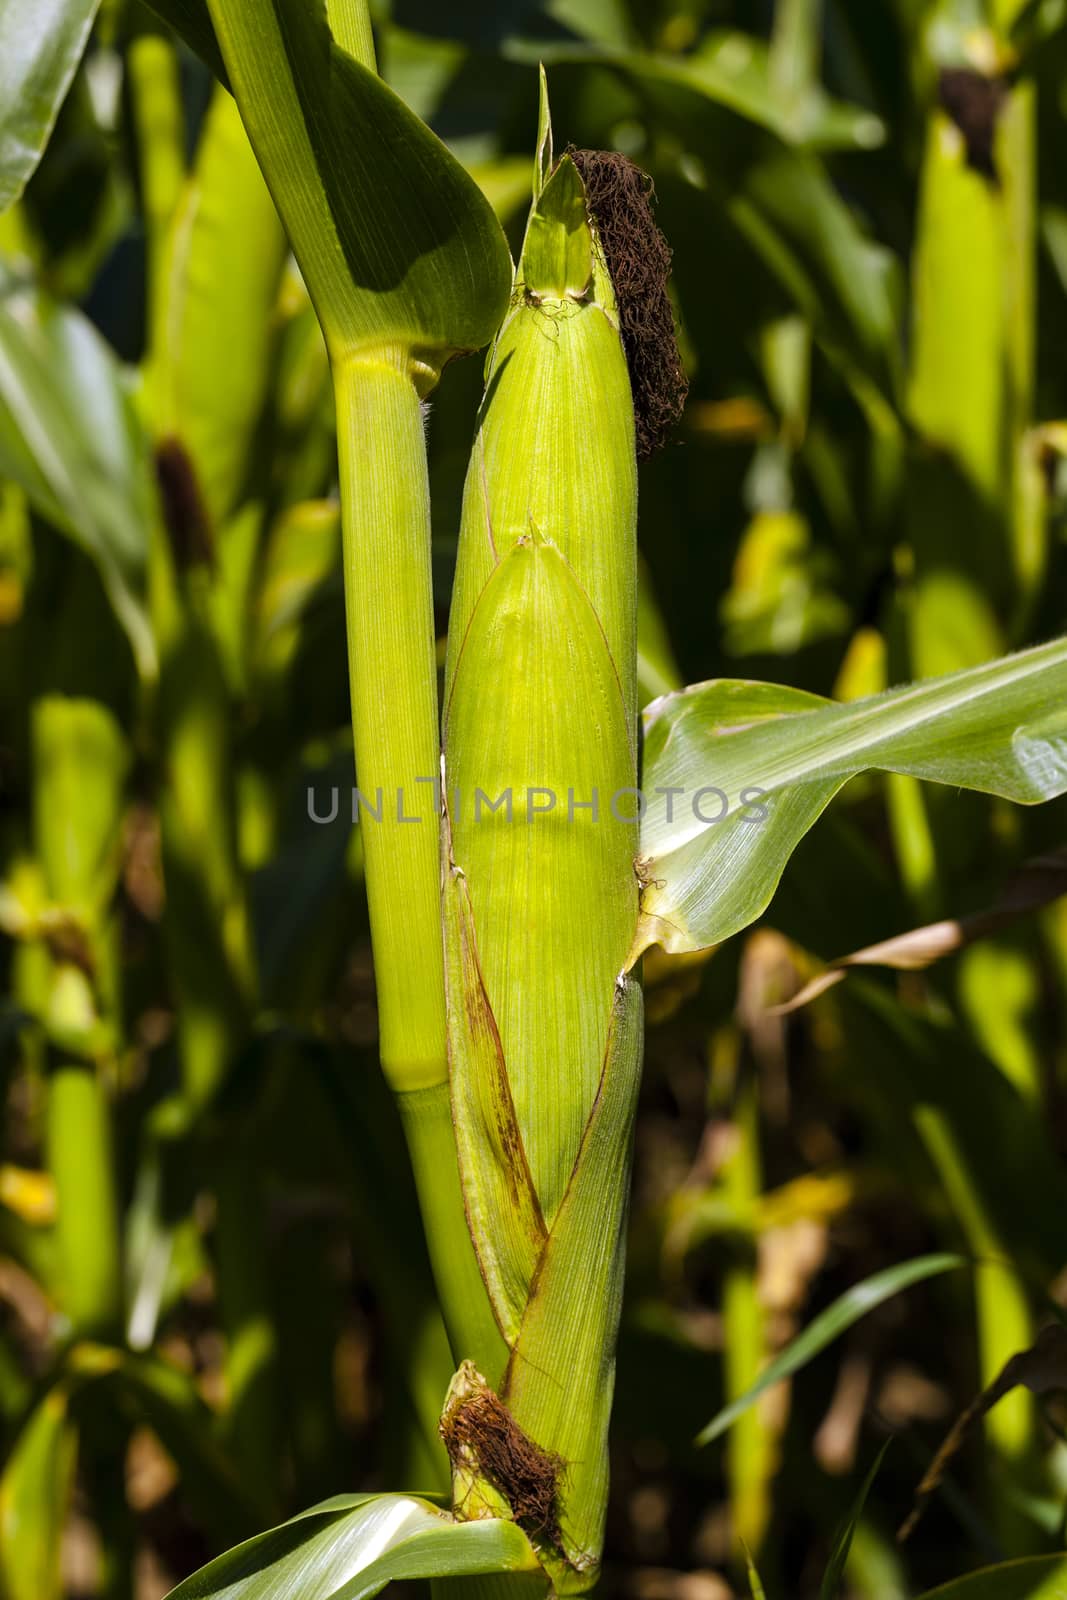   photographed by a close up ears of green corn.